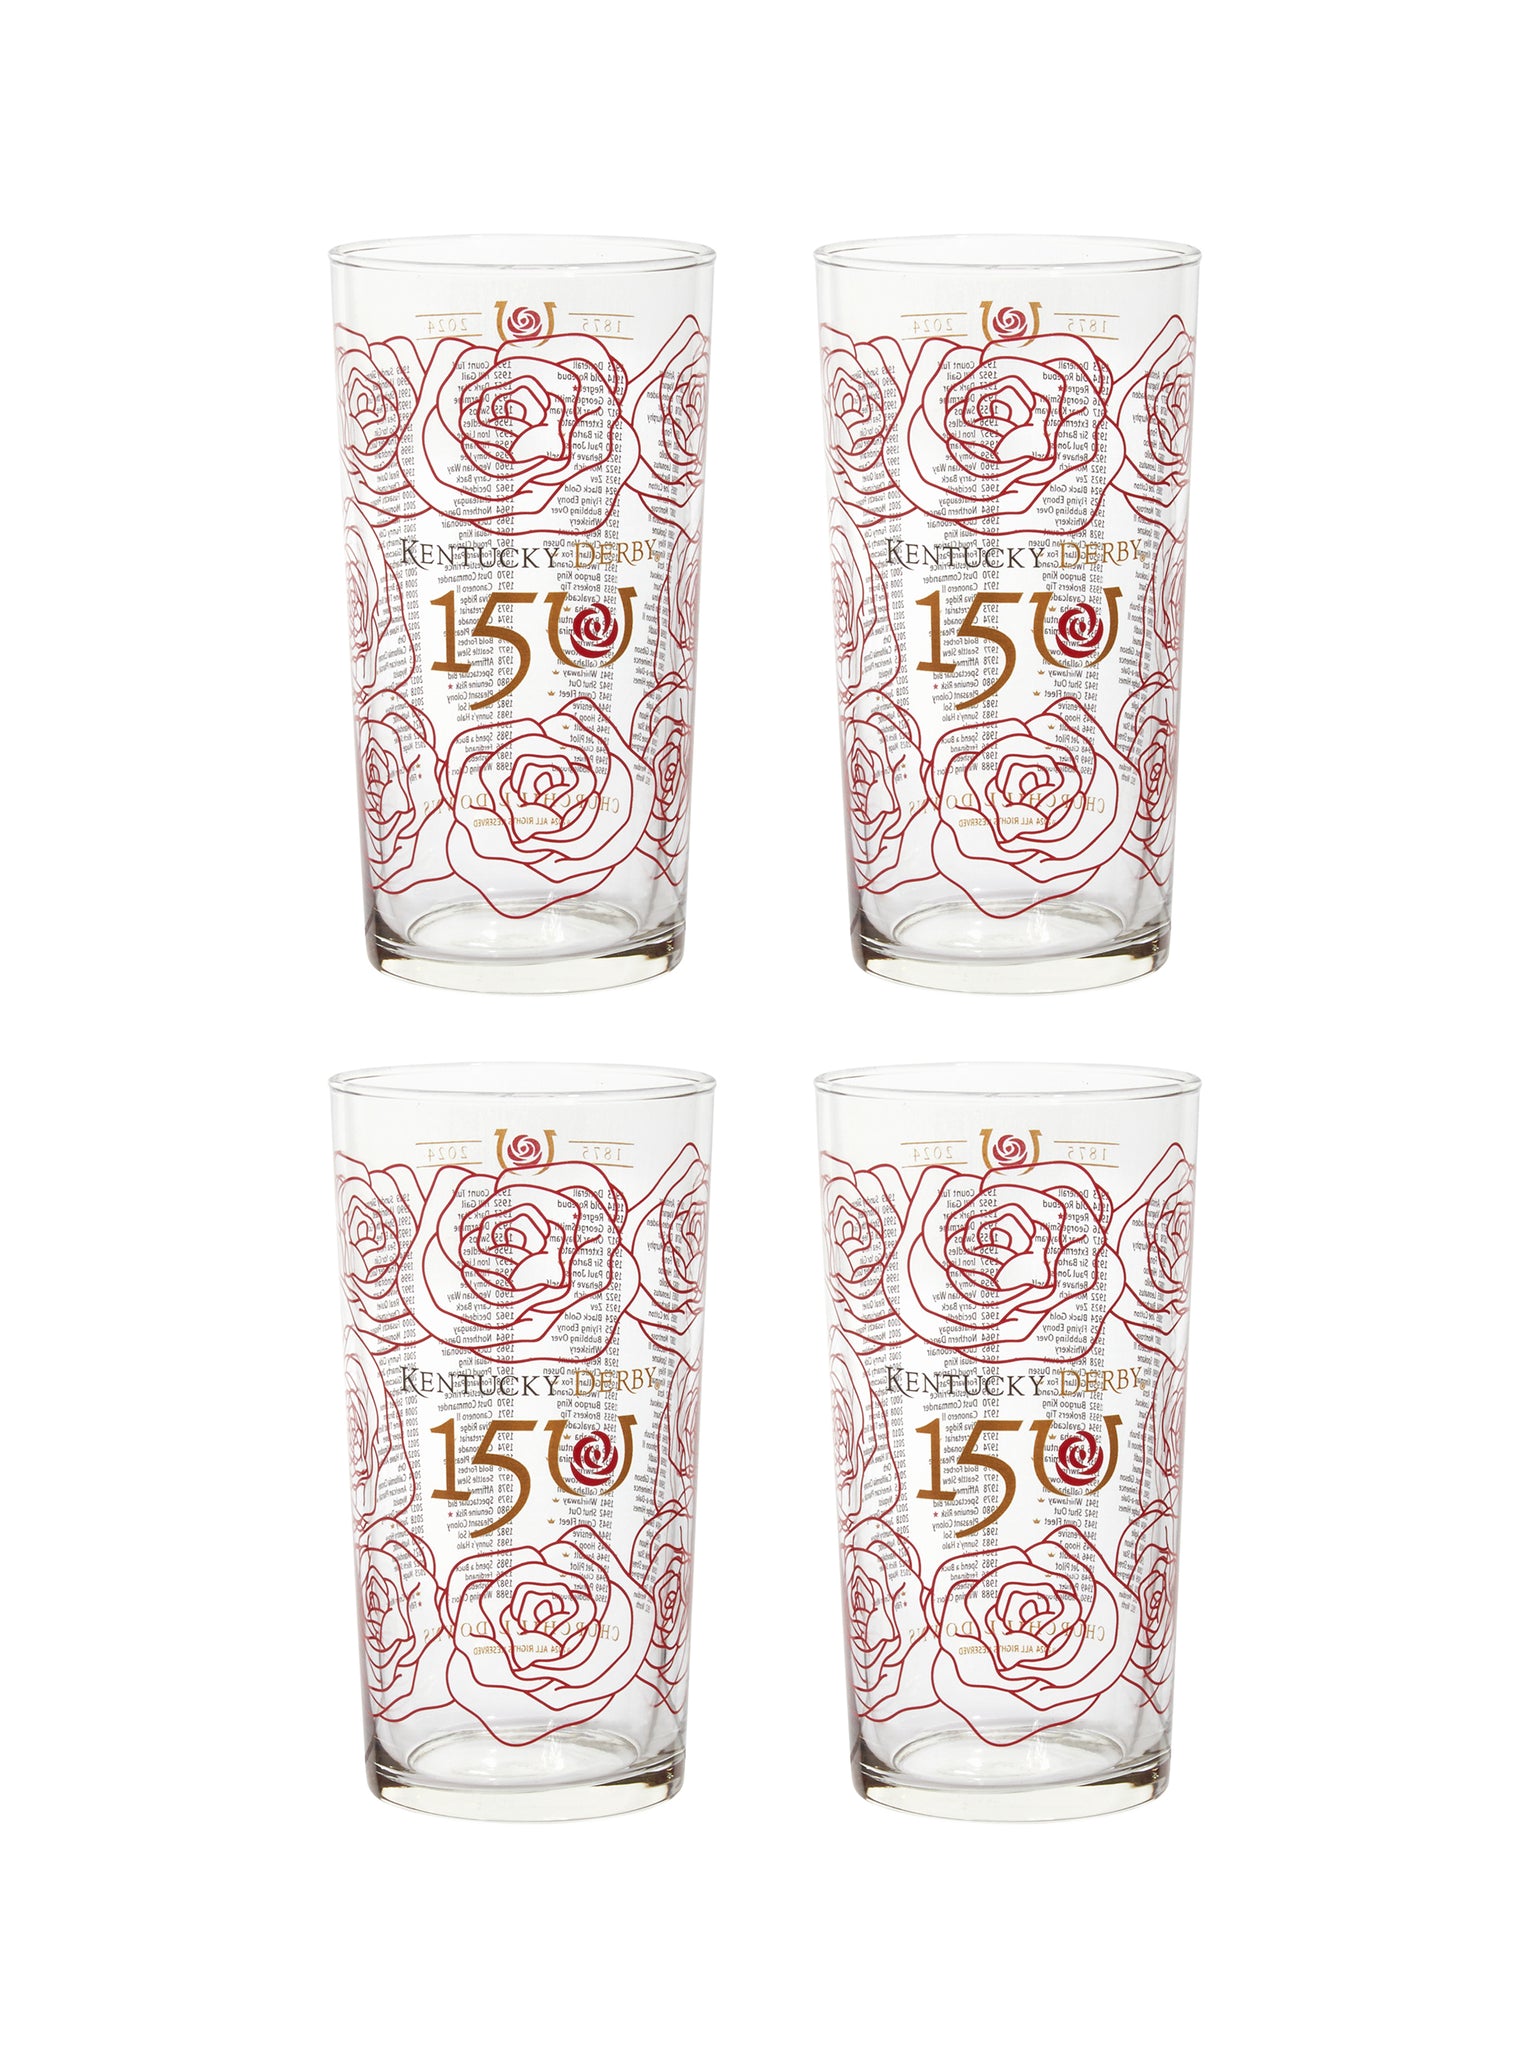 Kentucky Derby 150th Mint Julep Glasses Set of Four Weston Table